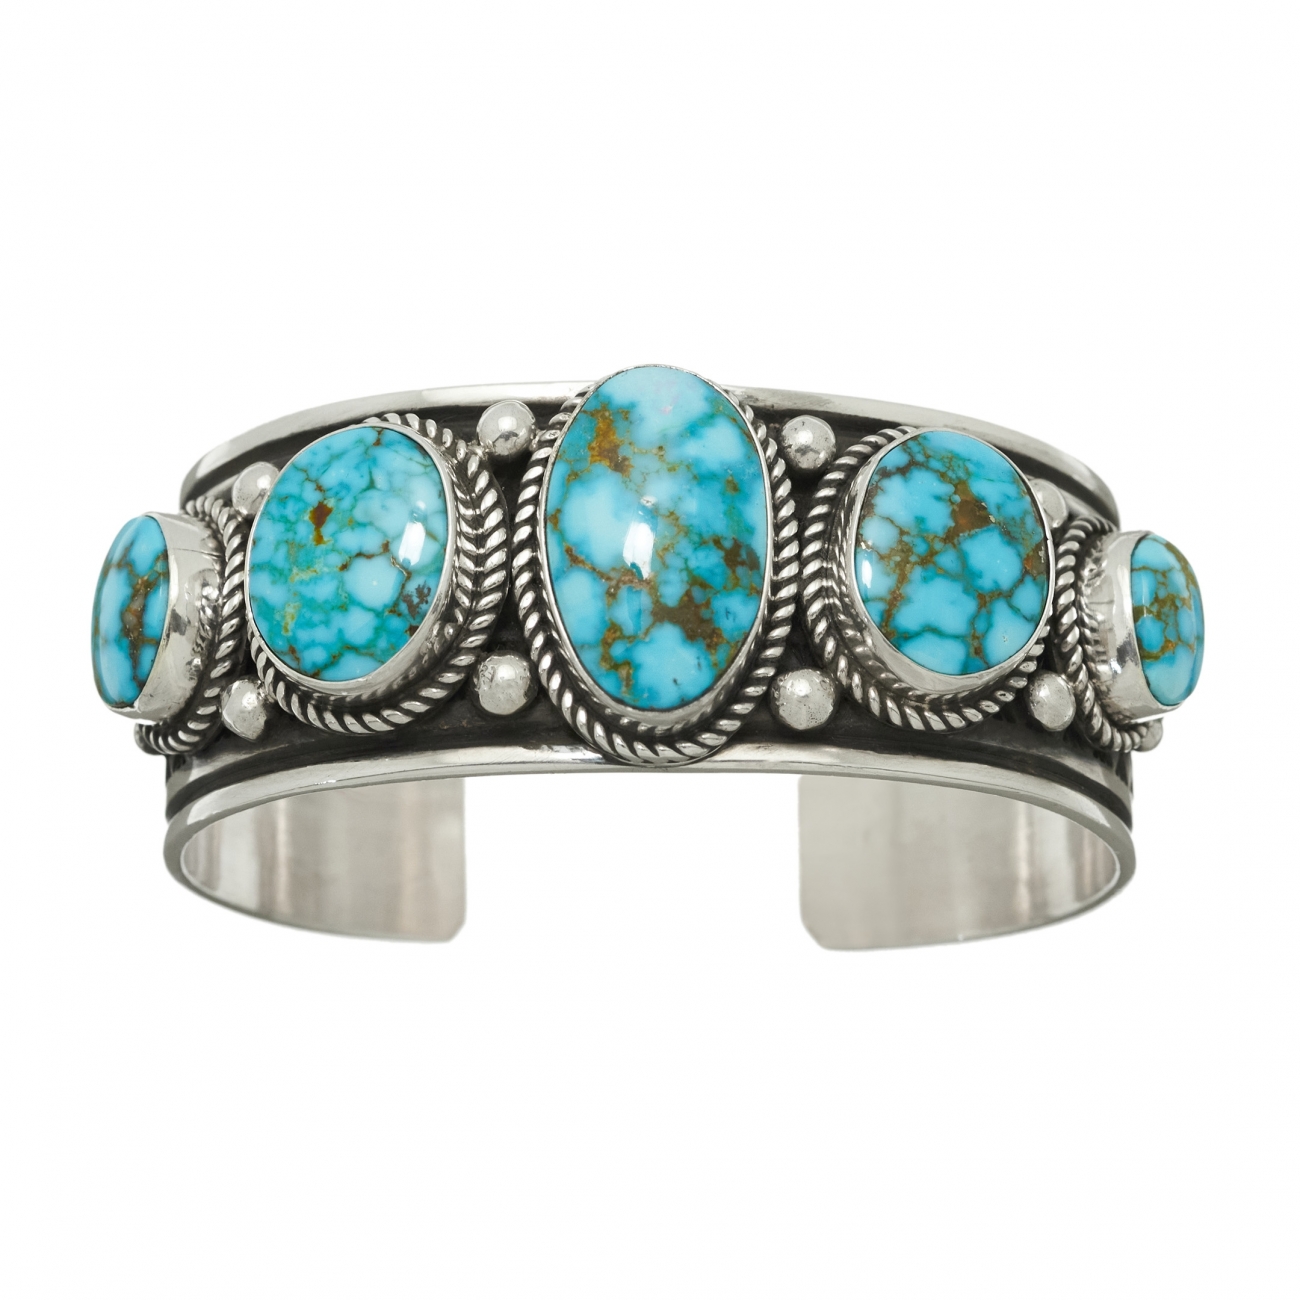 Navajo bracelet BR641 for women in turquoise and silver - Harpo Paris